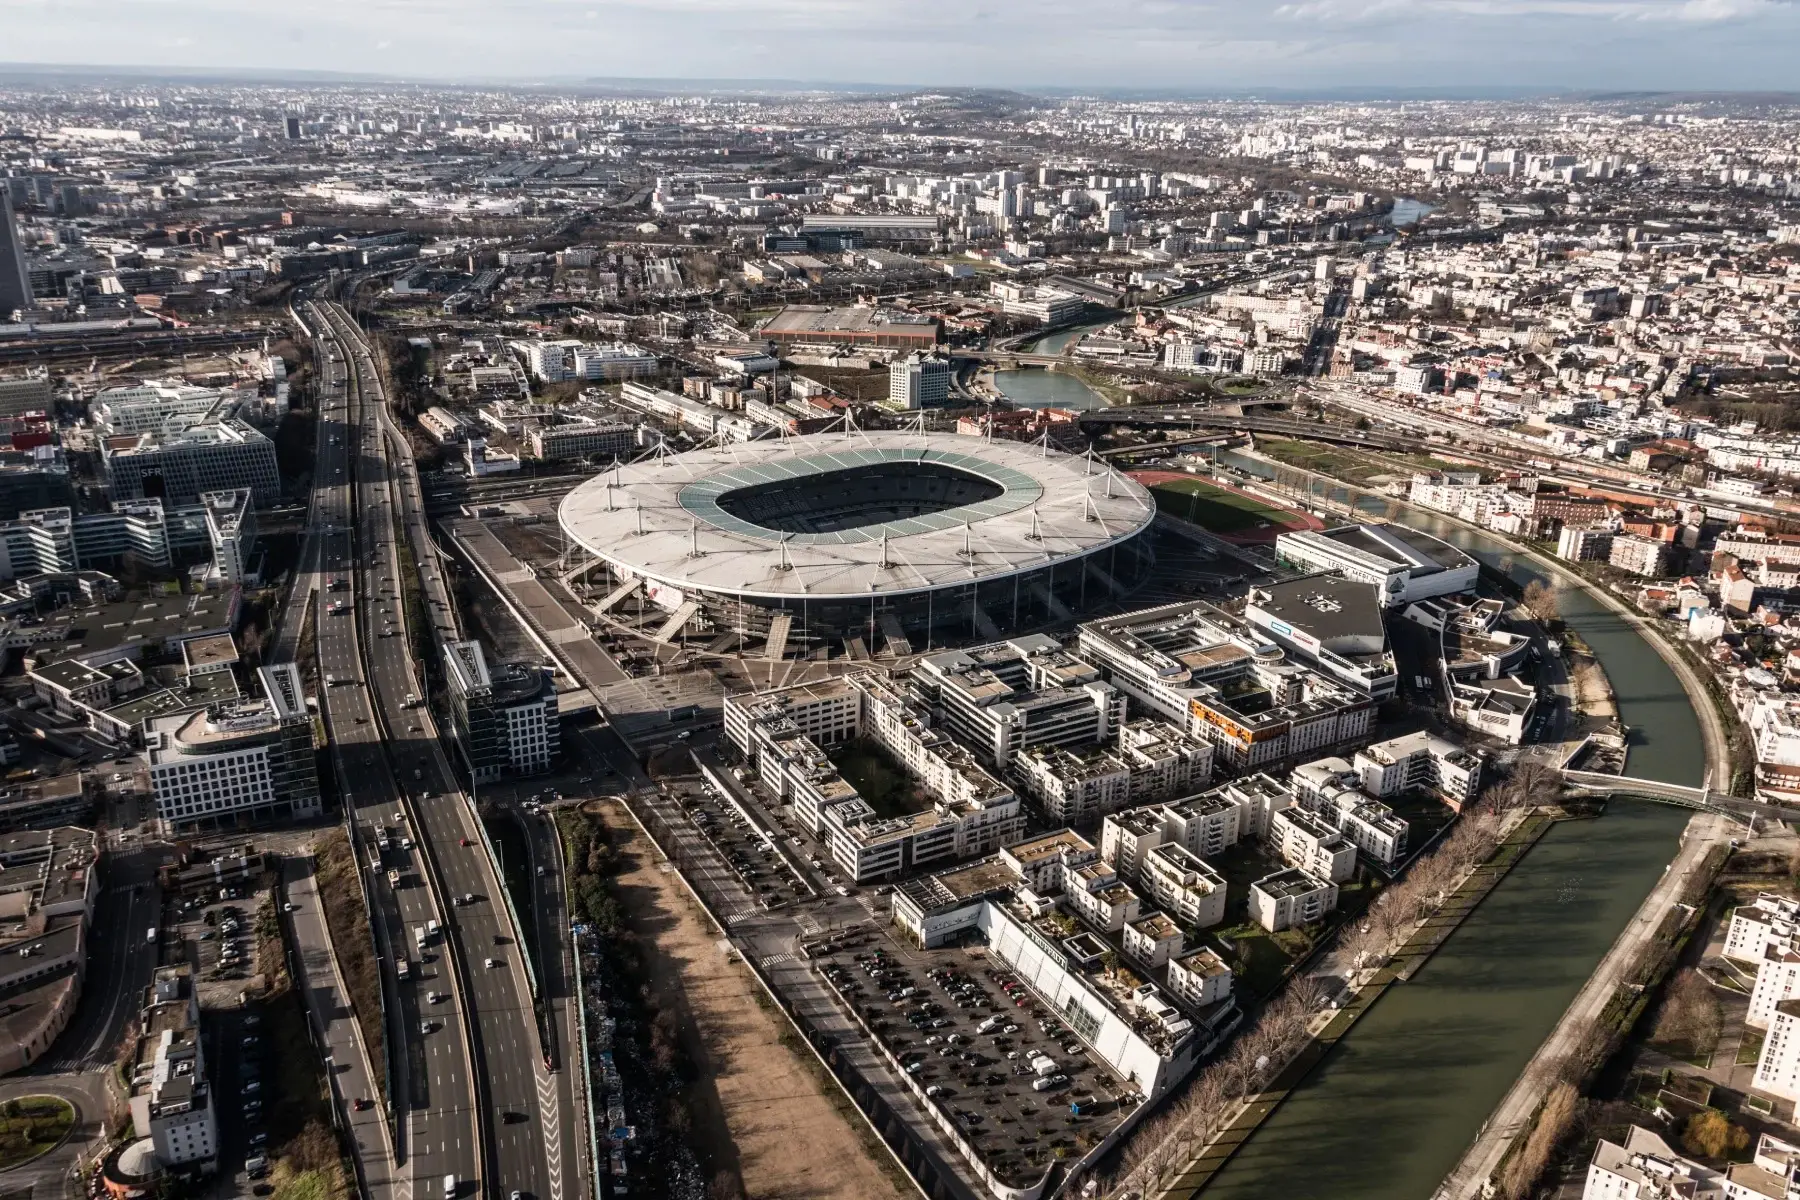 Aerial view of Stade de France in the suburb of Saint-Denis